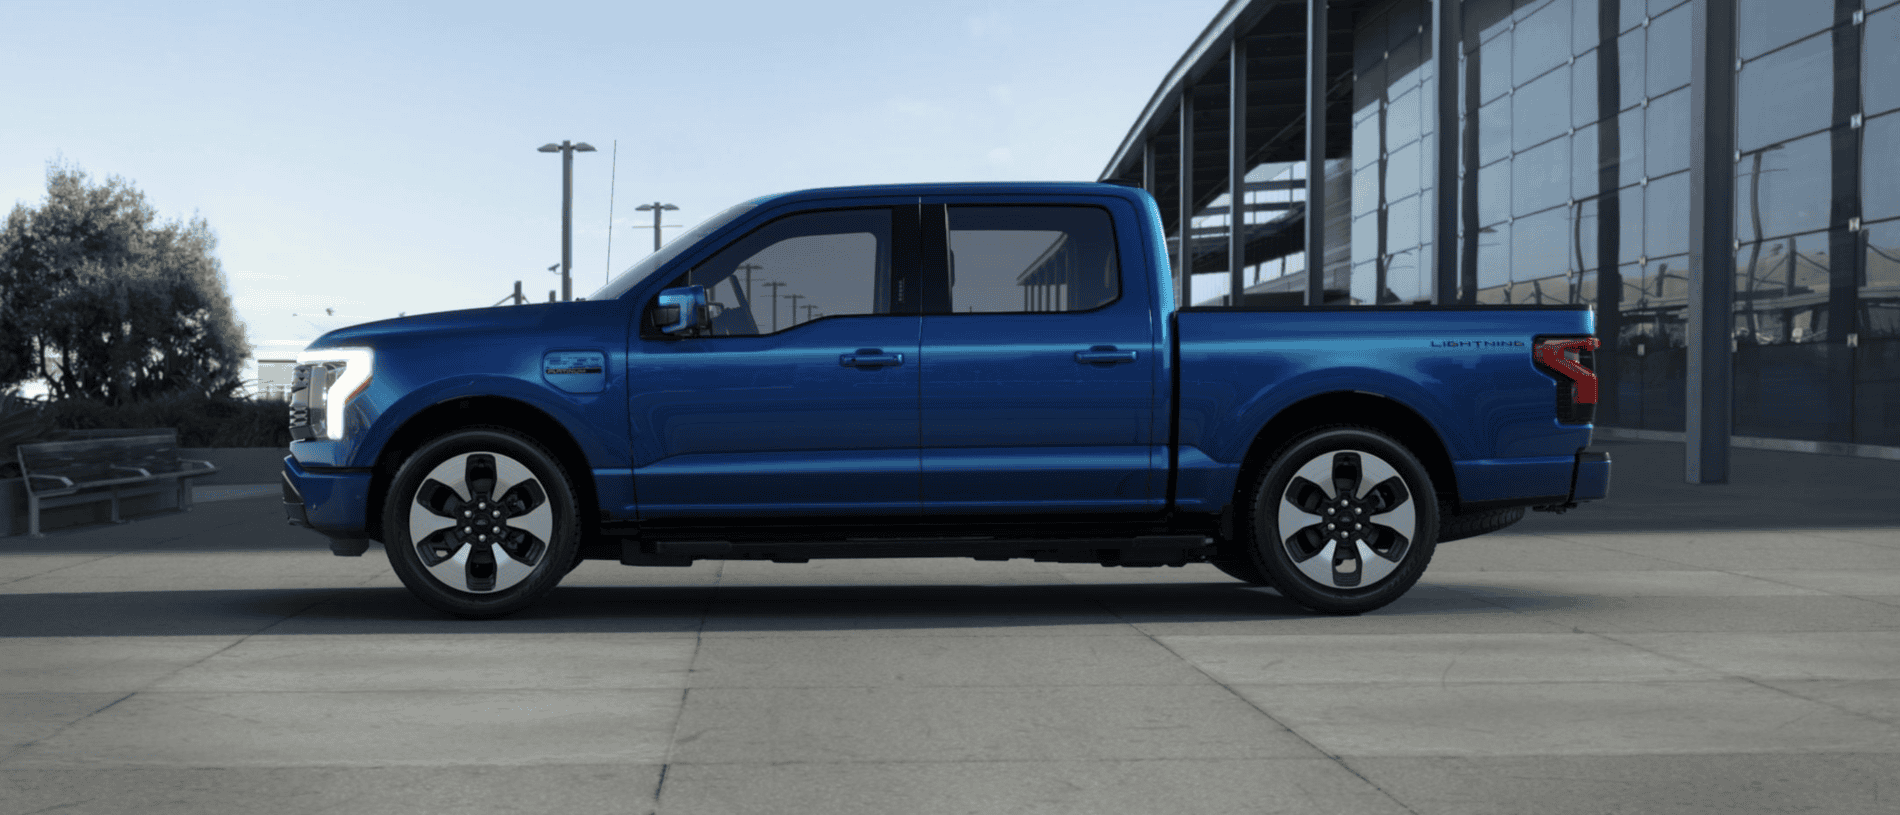 Ford F-150 Lightning Too early to talk colors for 2022 F-150 Lightning? Antimatter Blue